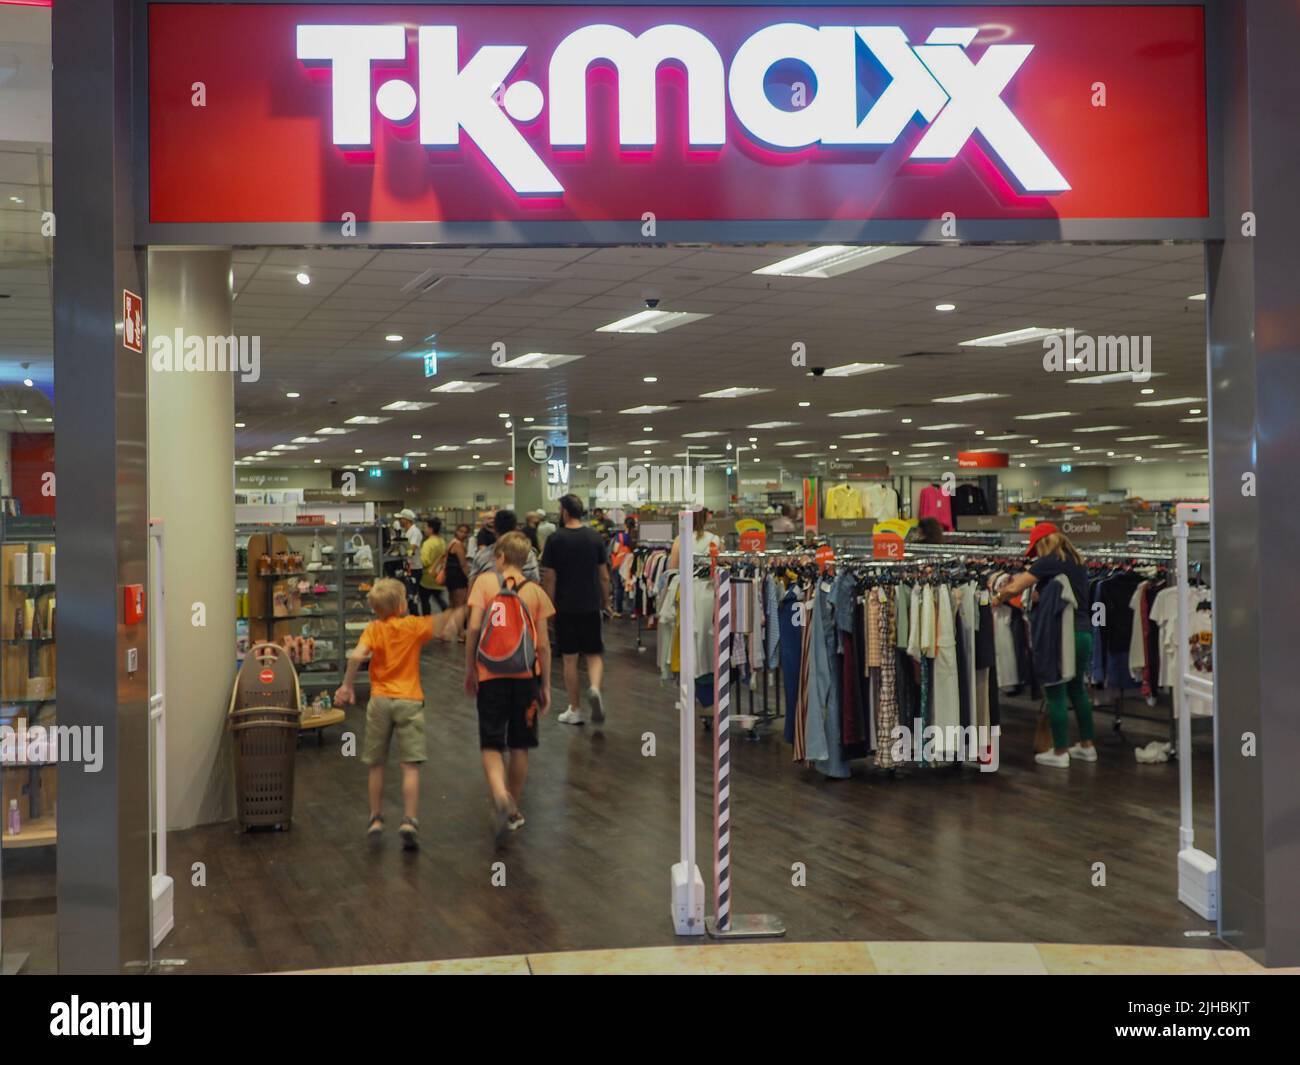 TK Maxx to open first store in Perth - Inside Retail Australia